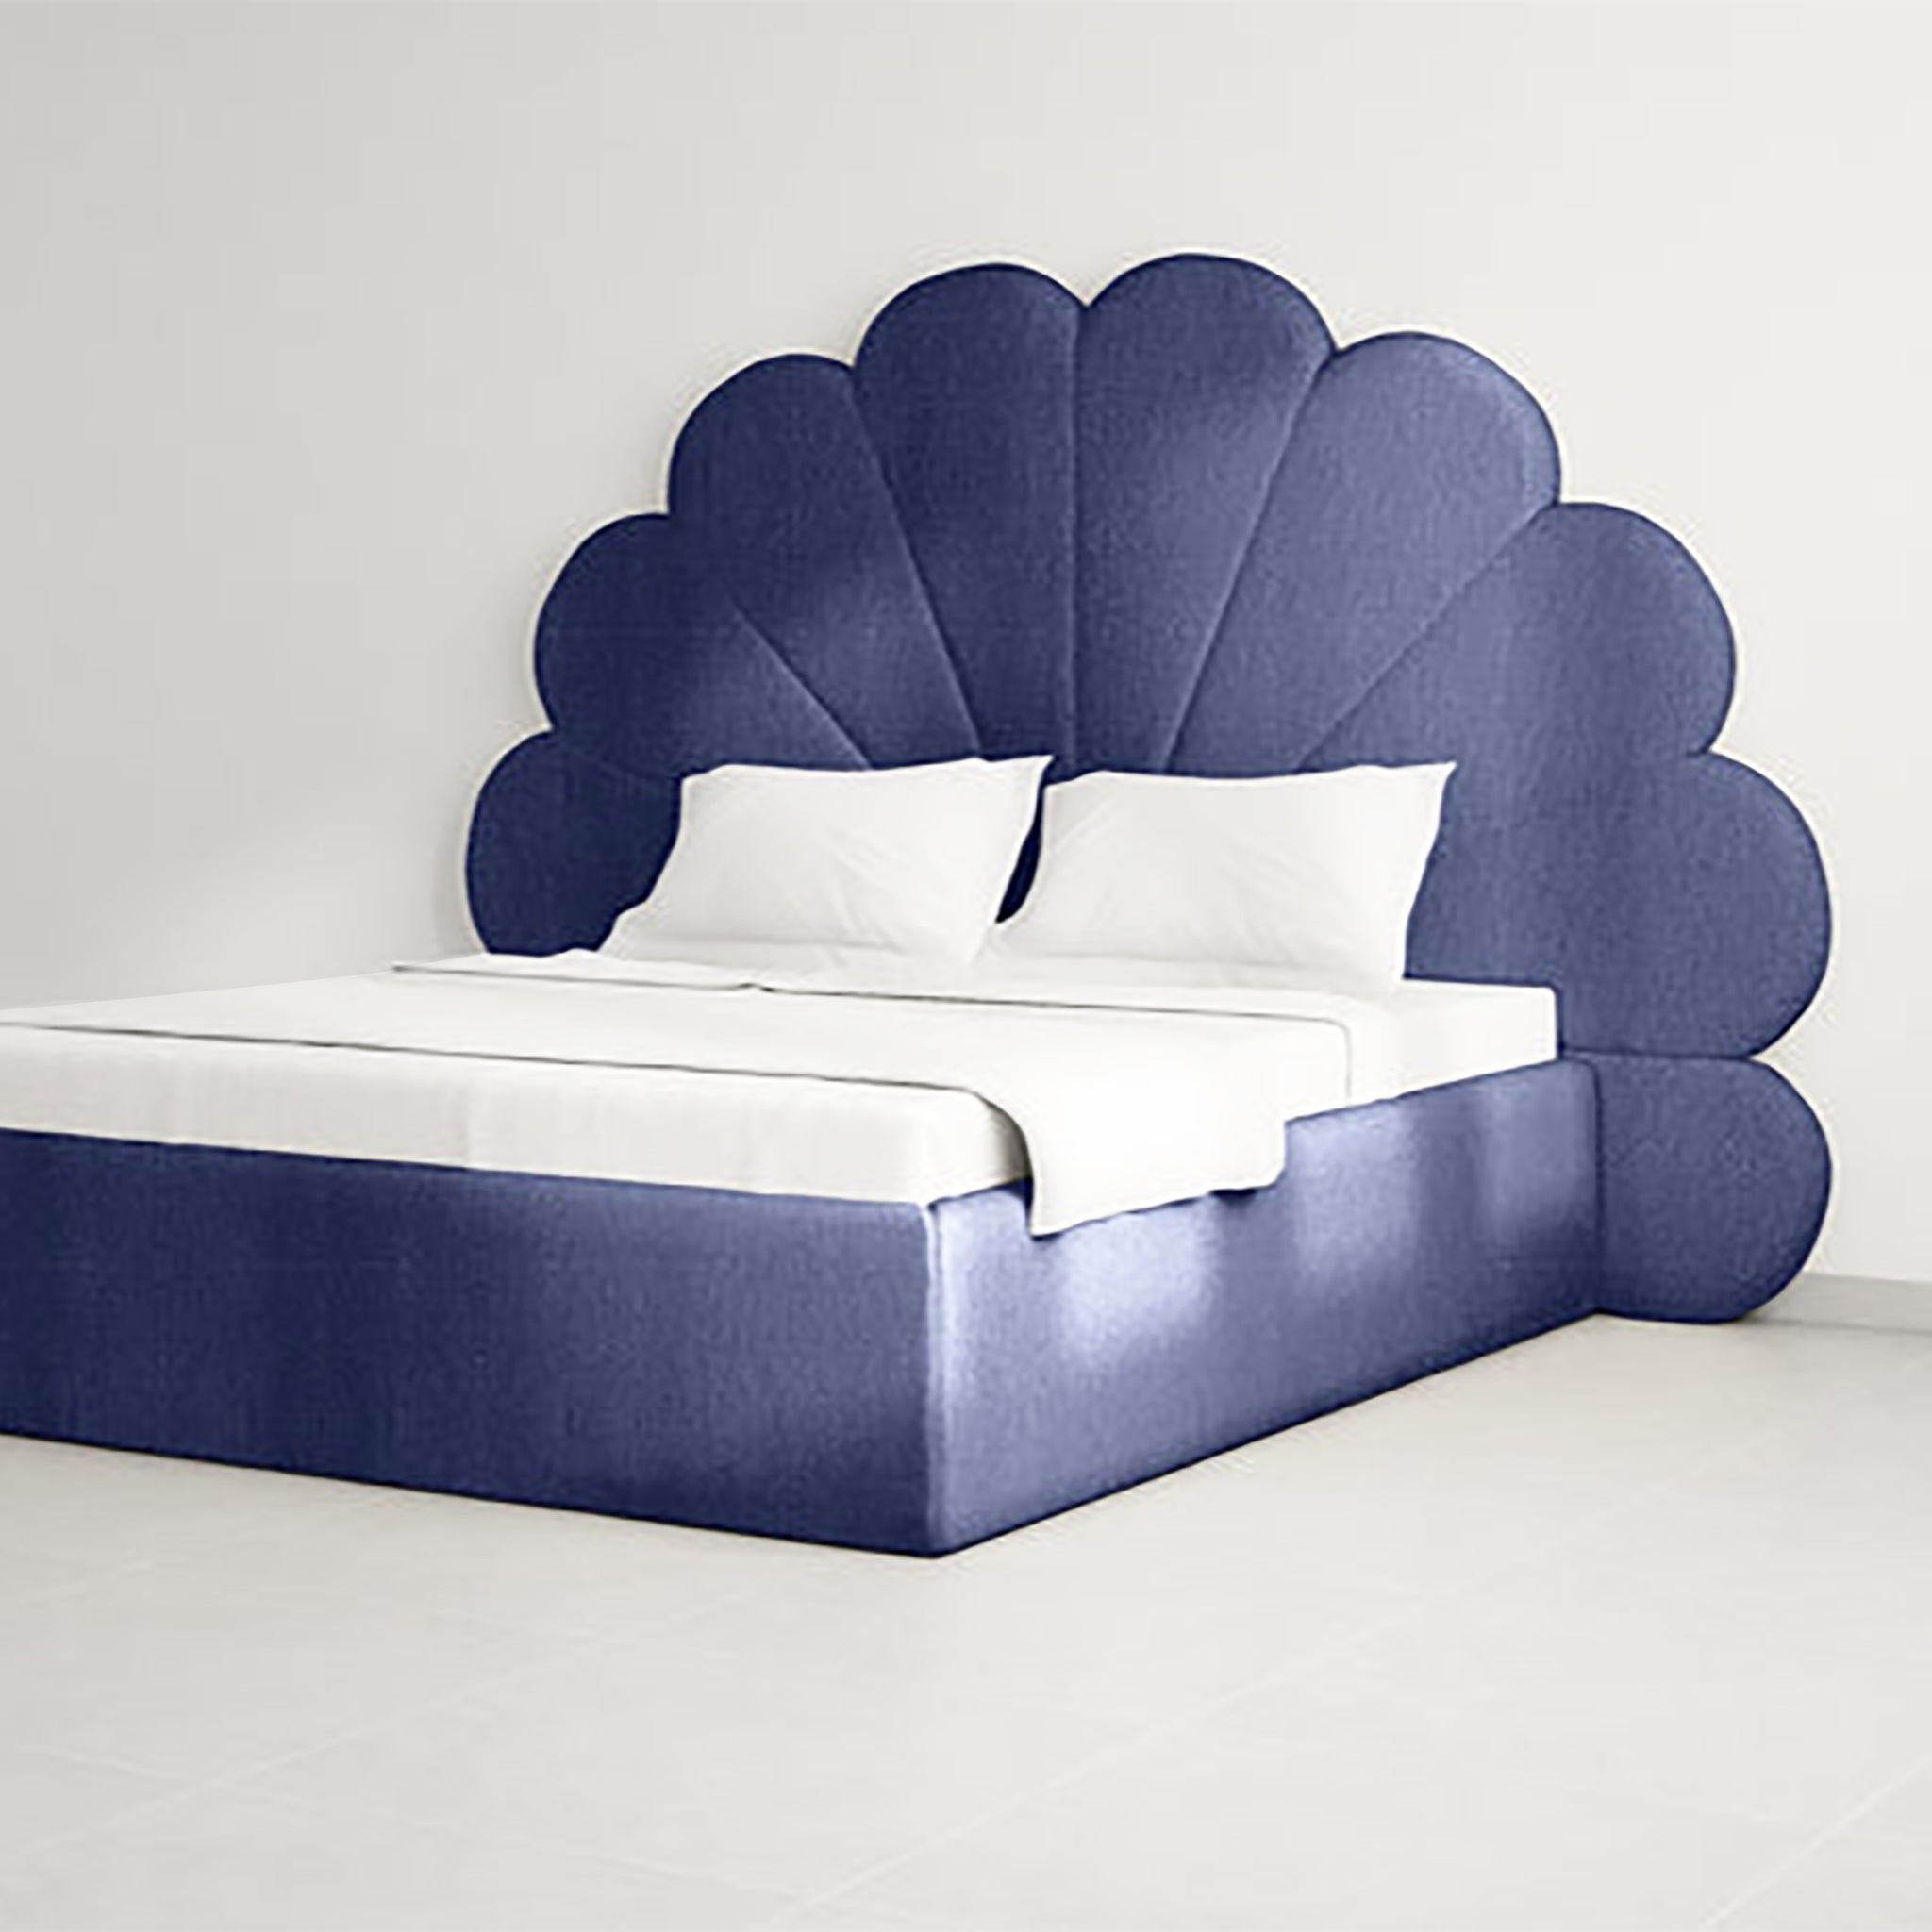 The Kyle Bed for master bedrooms in Dubai bed stores